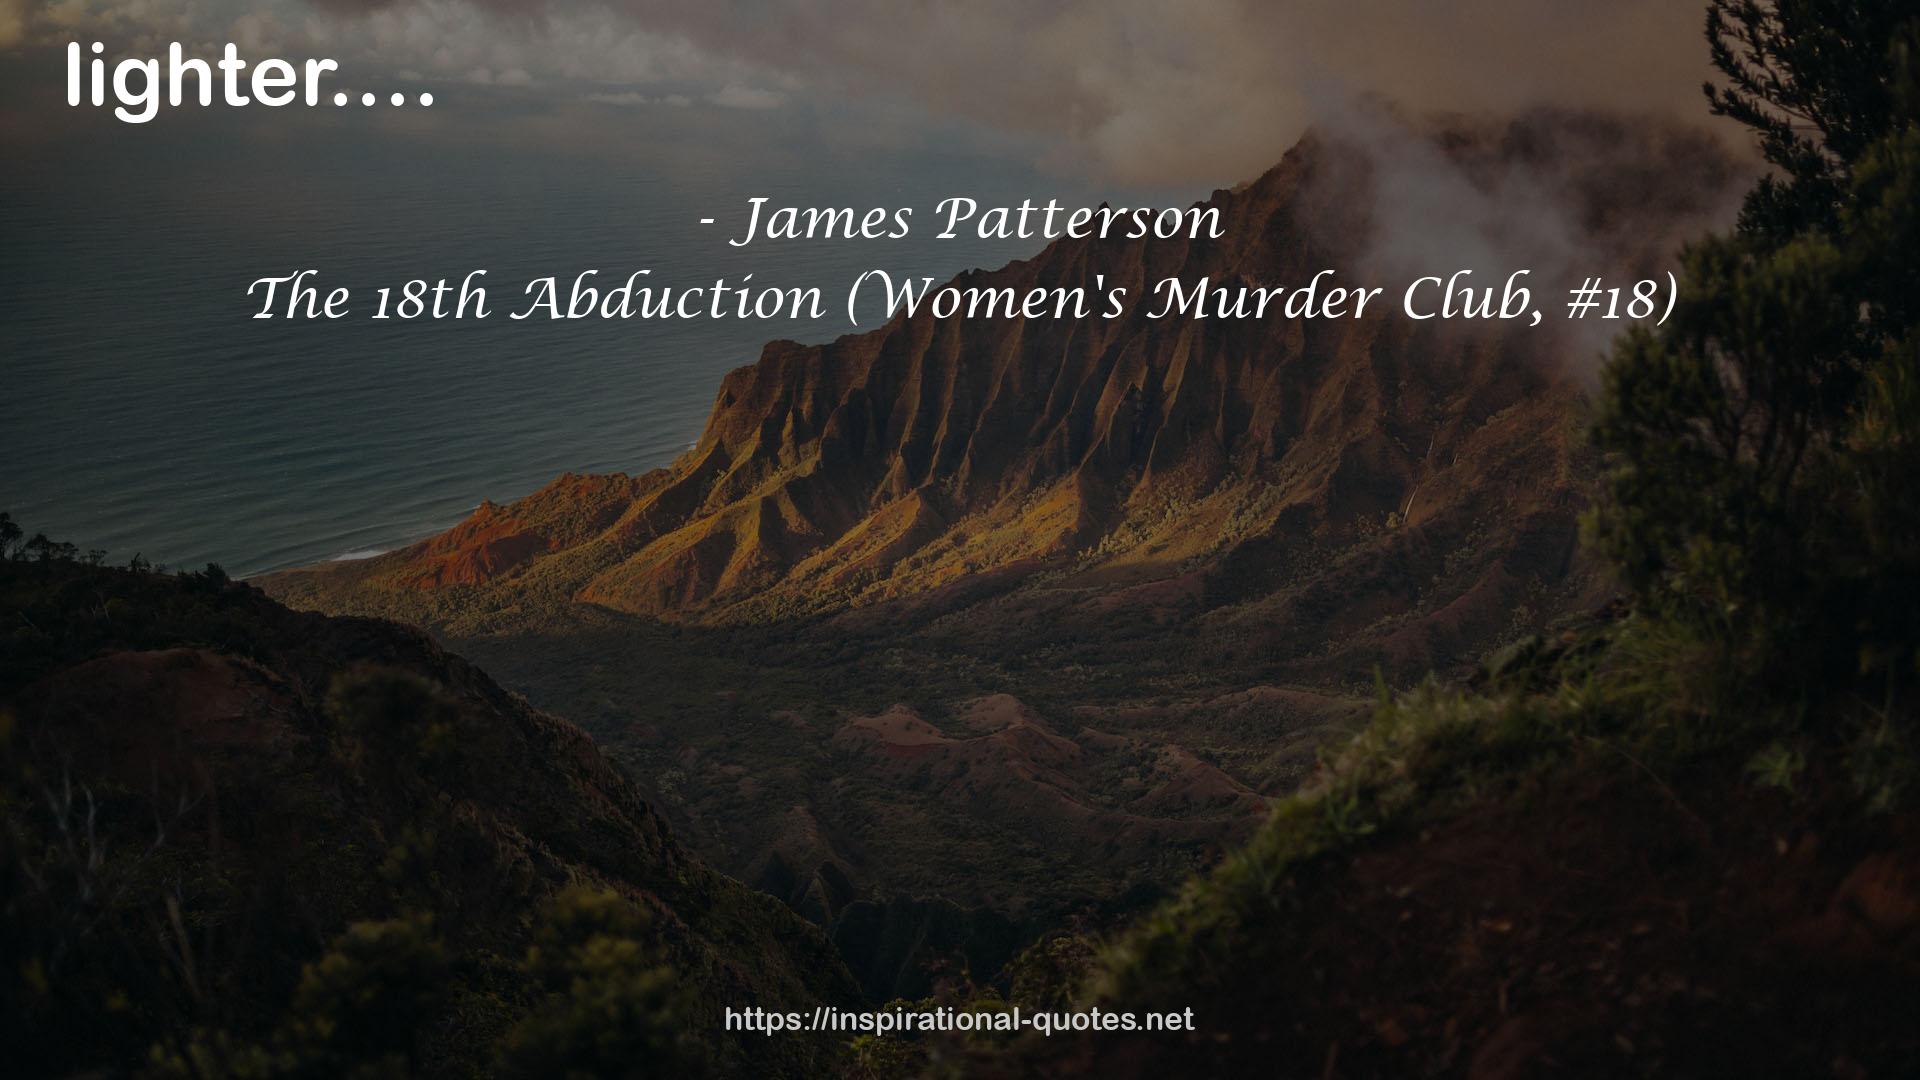 The 18th Abduction (Women's Murder Club, #18) QUOTES